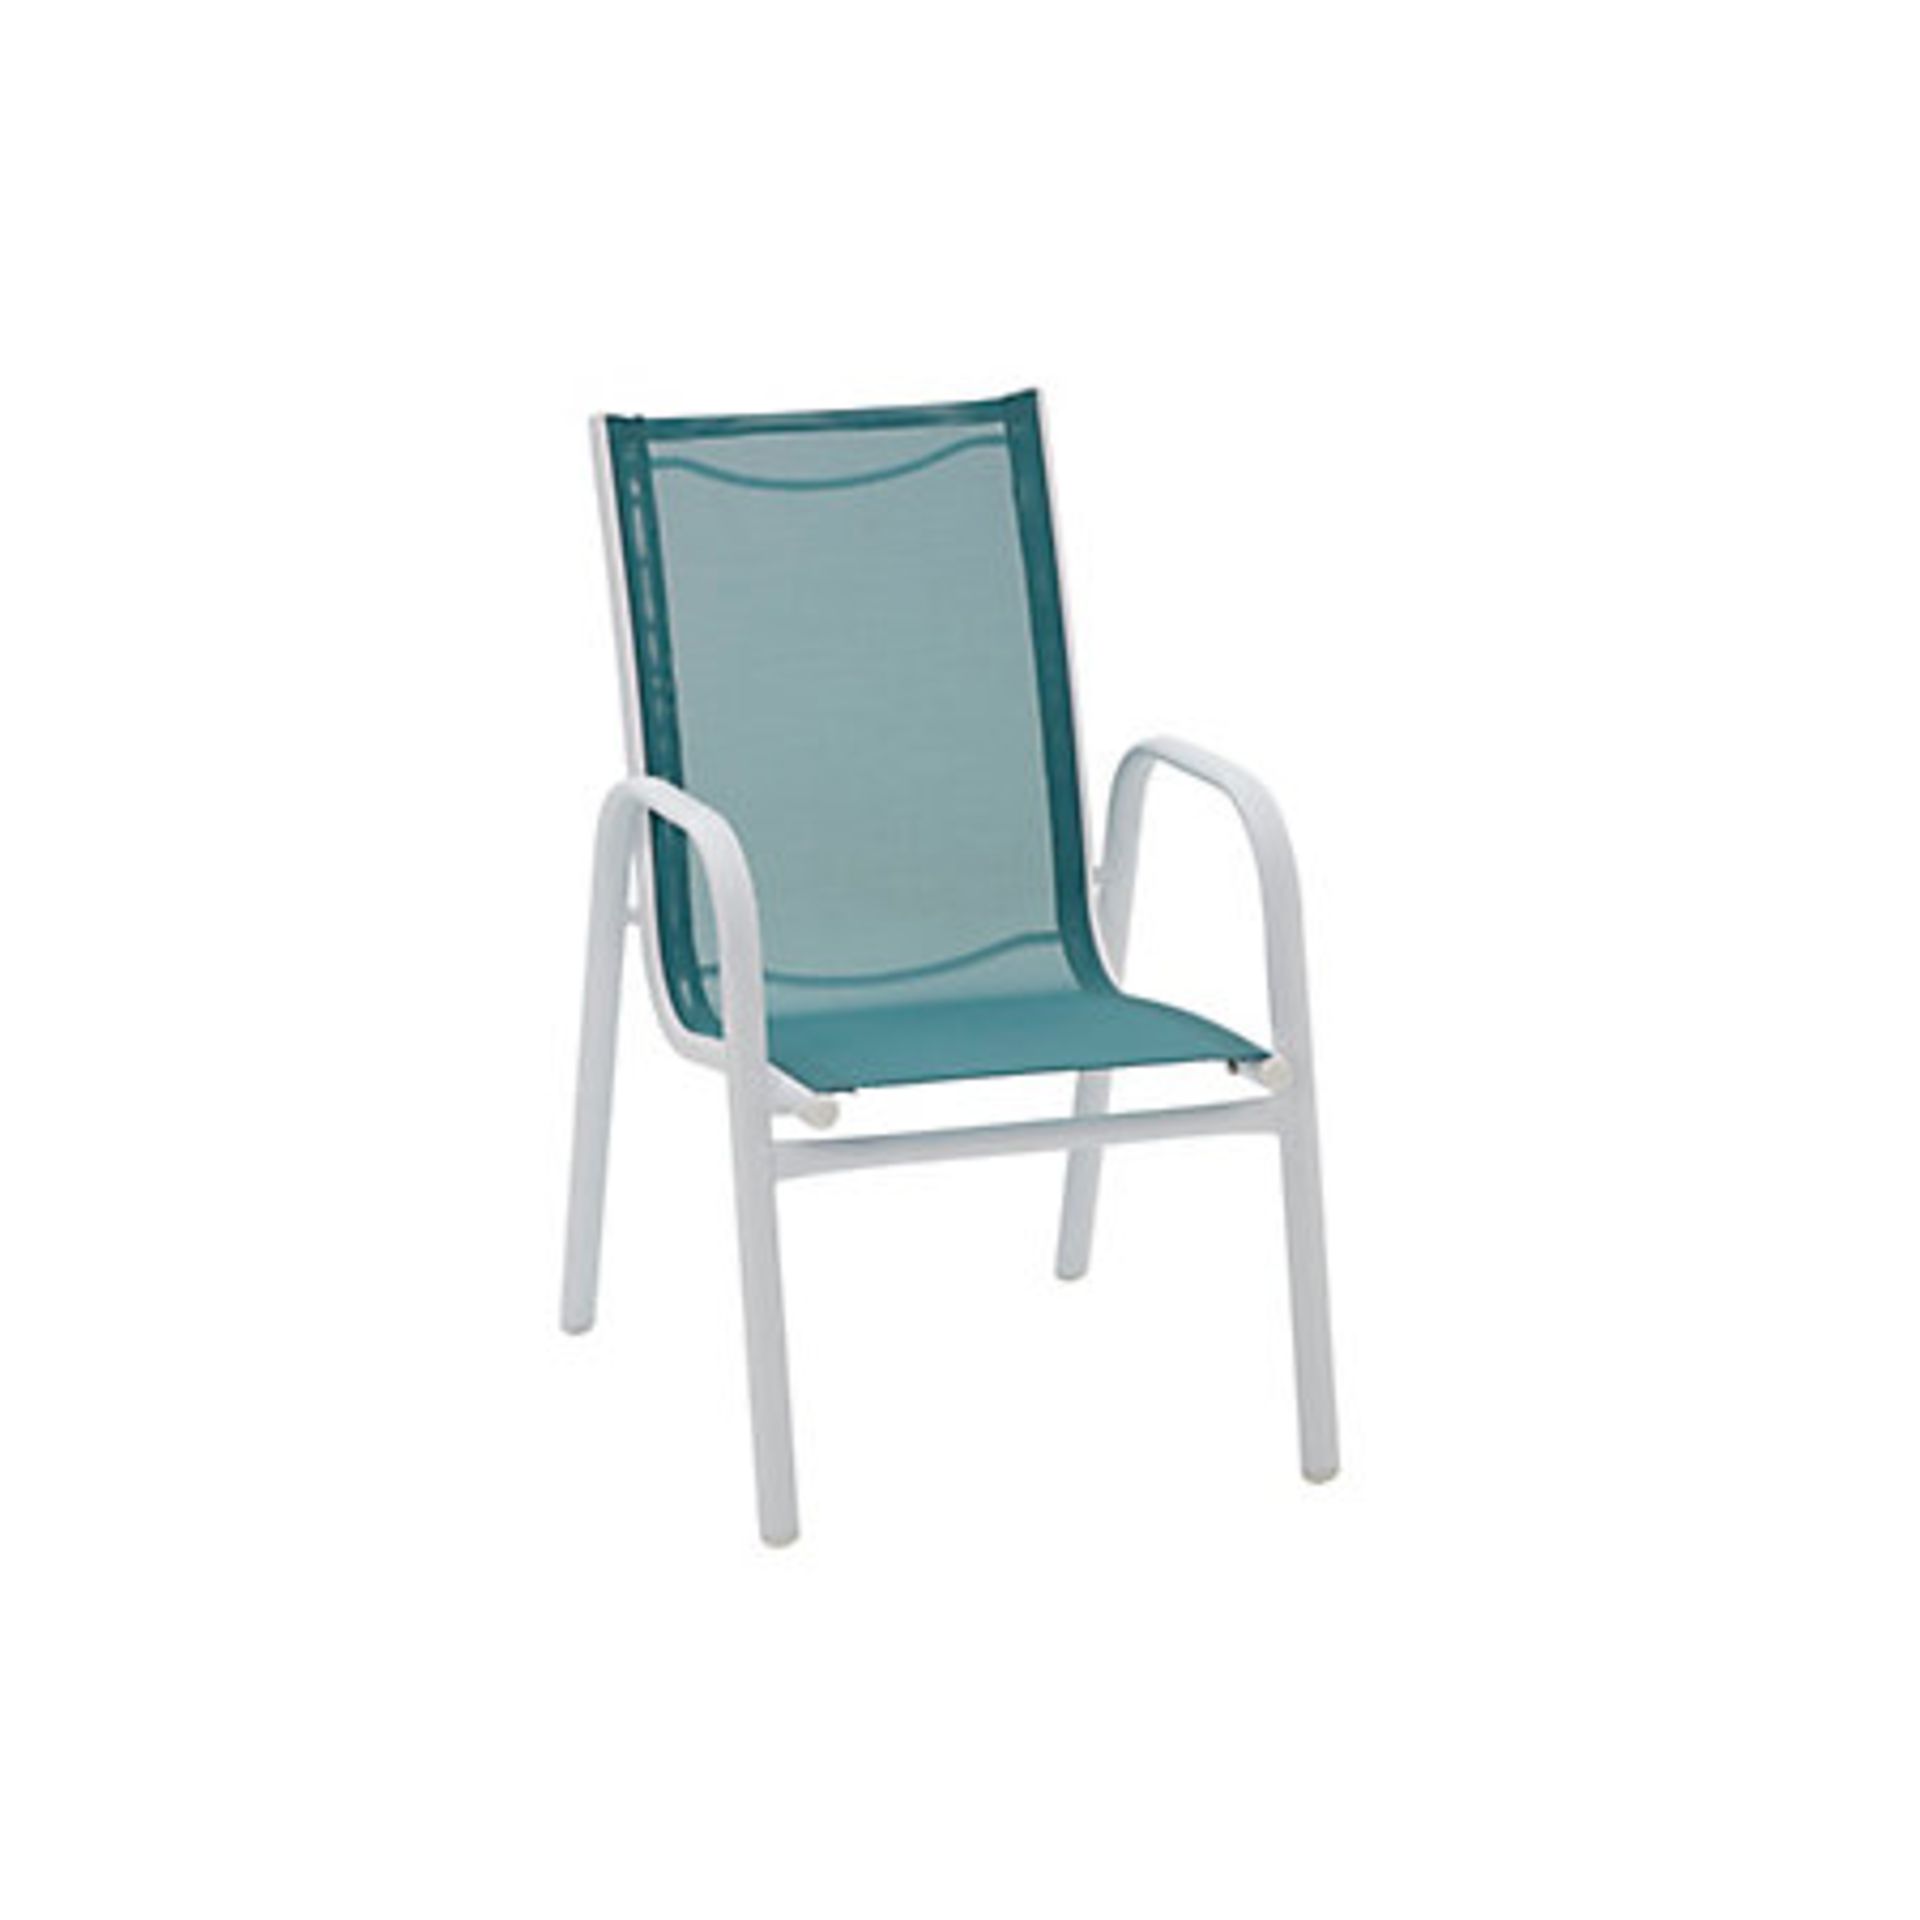 V Grade A Childrens Steel Garden Chair In Blue And Pink With Plastic Seat X  5  Bid price to be